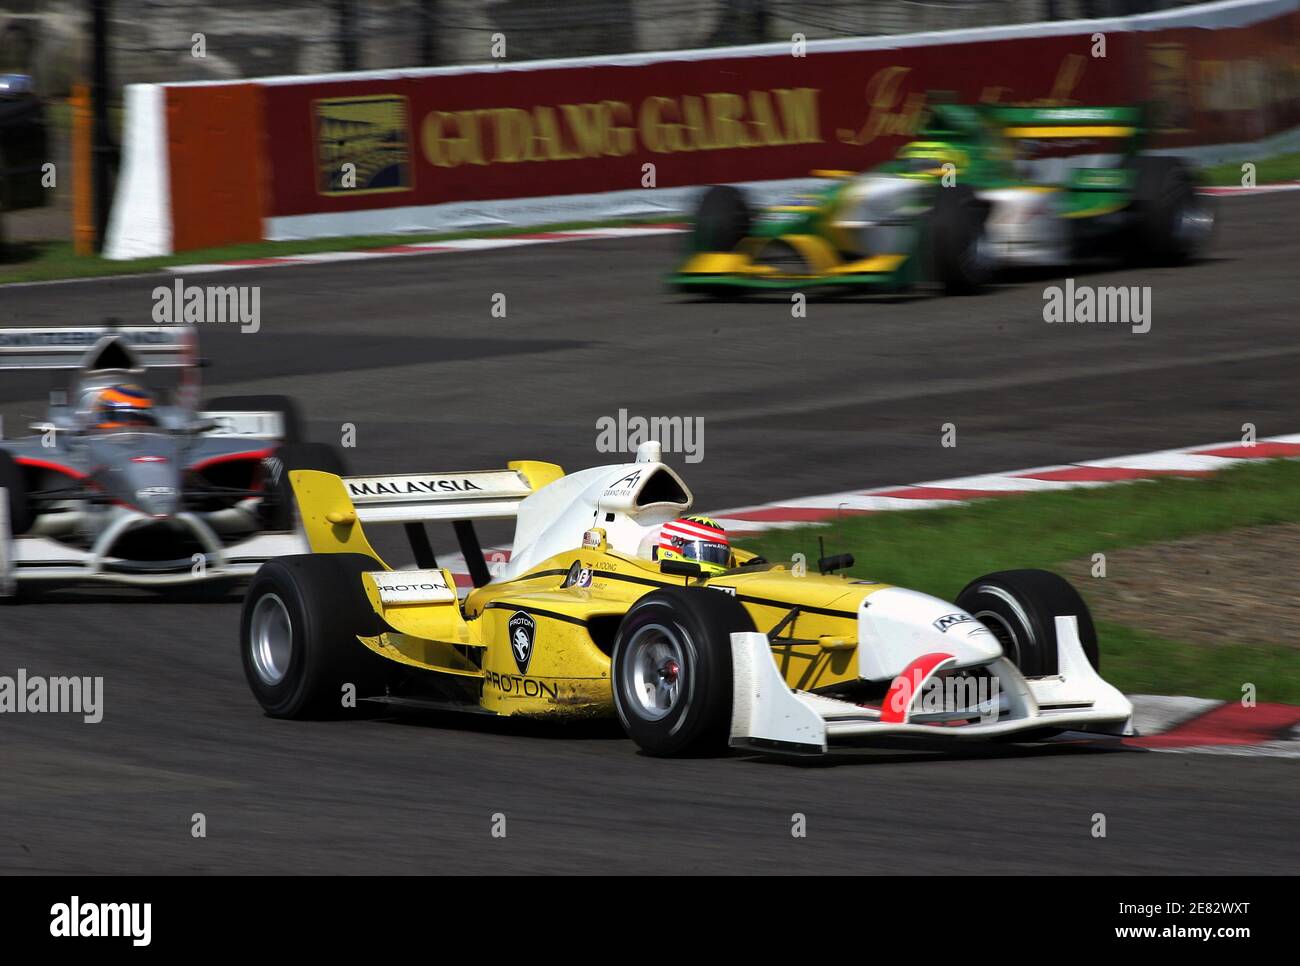 Malaysian Alex Yoong (front) drives his car during the feature race of the A1 Grand Prix Championship at the Sentul circuit in Bogor, West Java province, Indonesia February 12, 2006. Canada's Sean McIntosh won the feature race ahead of Yoong in second place and Australia's Marcus Marshall in third. REUTERS/Beawiharta Stock Photo